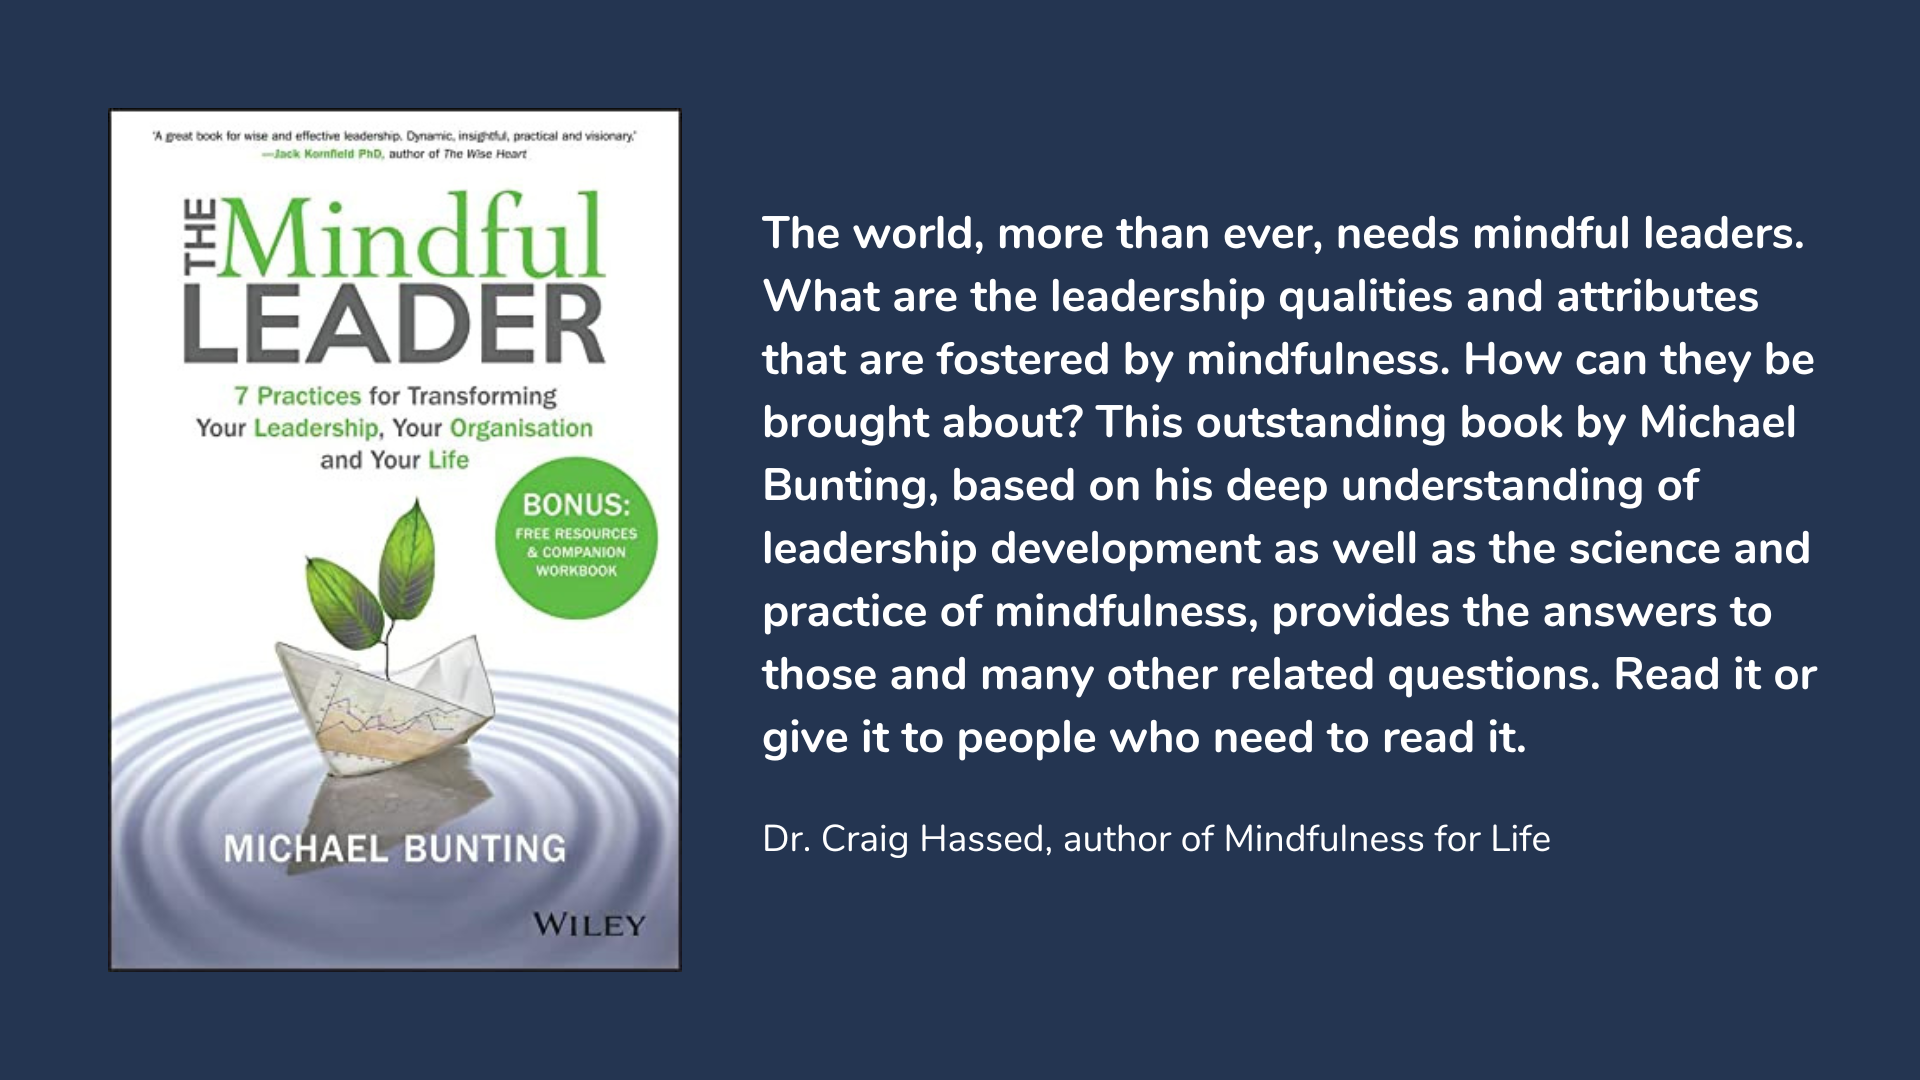 The Mindful Leader, book cover and description.